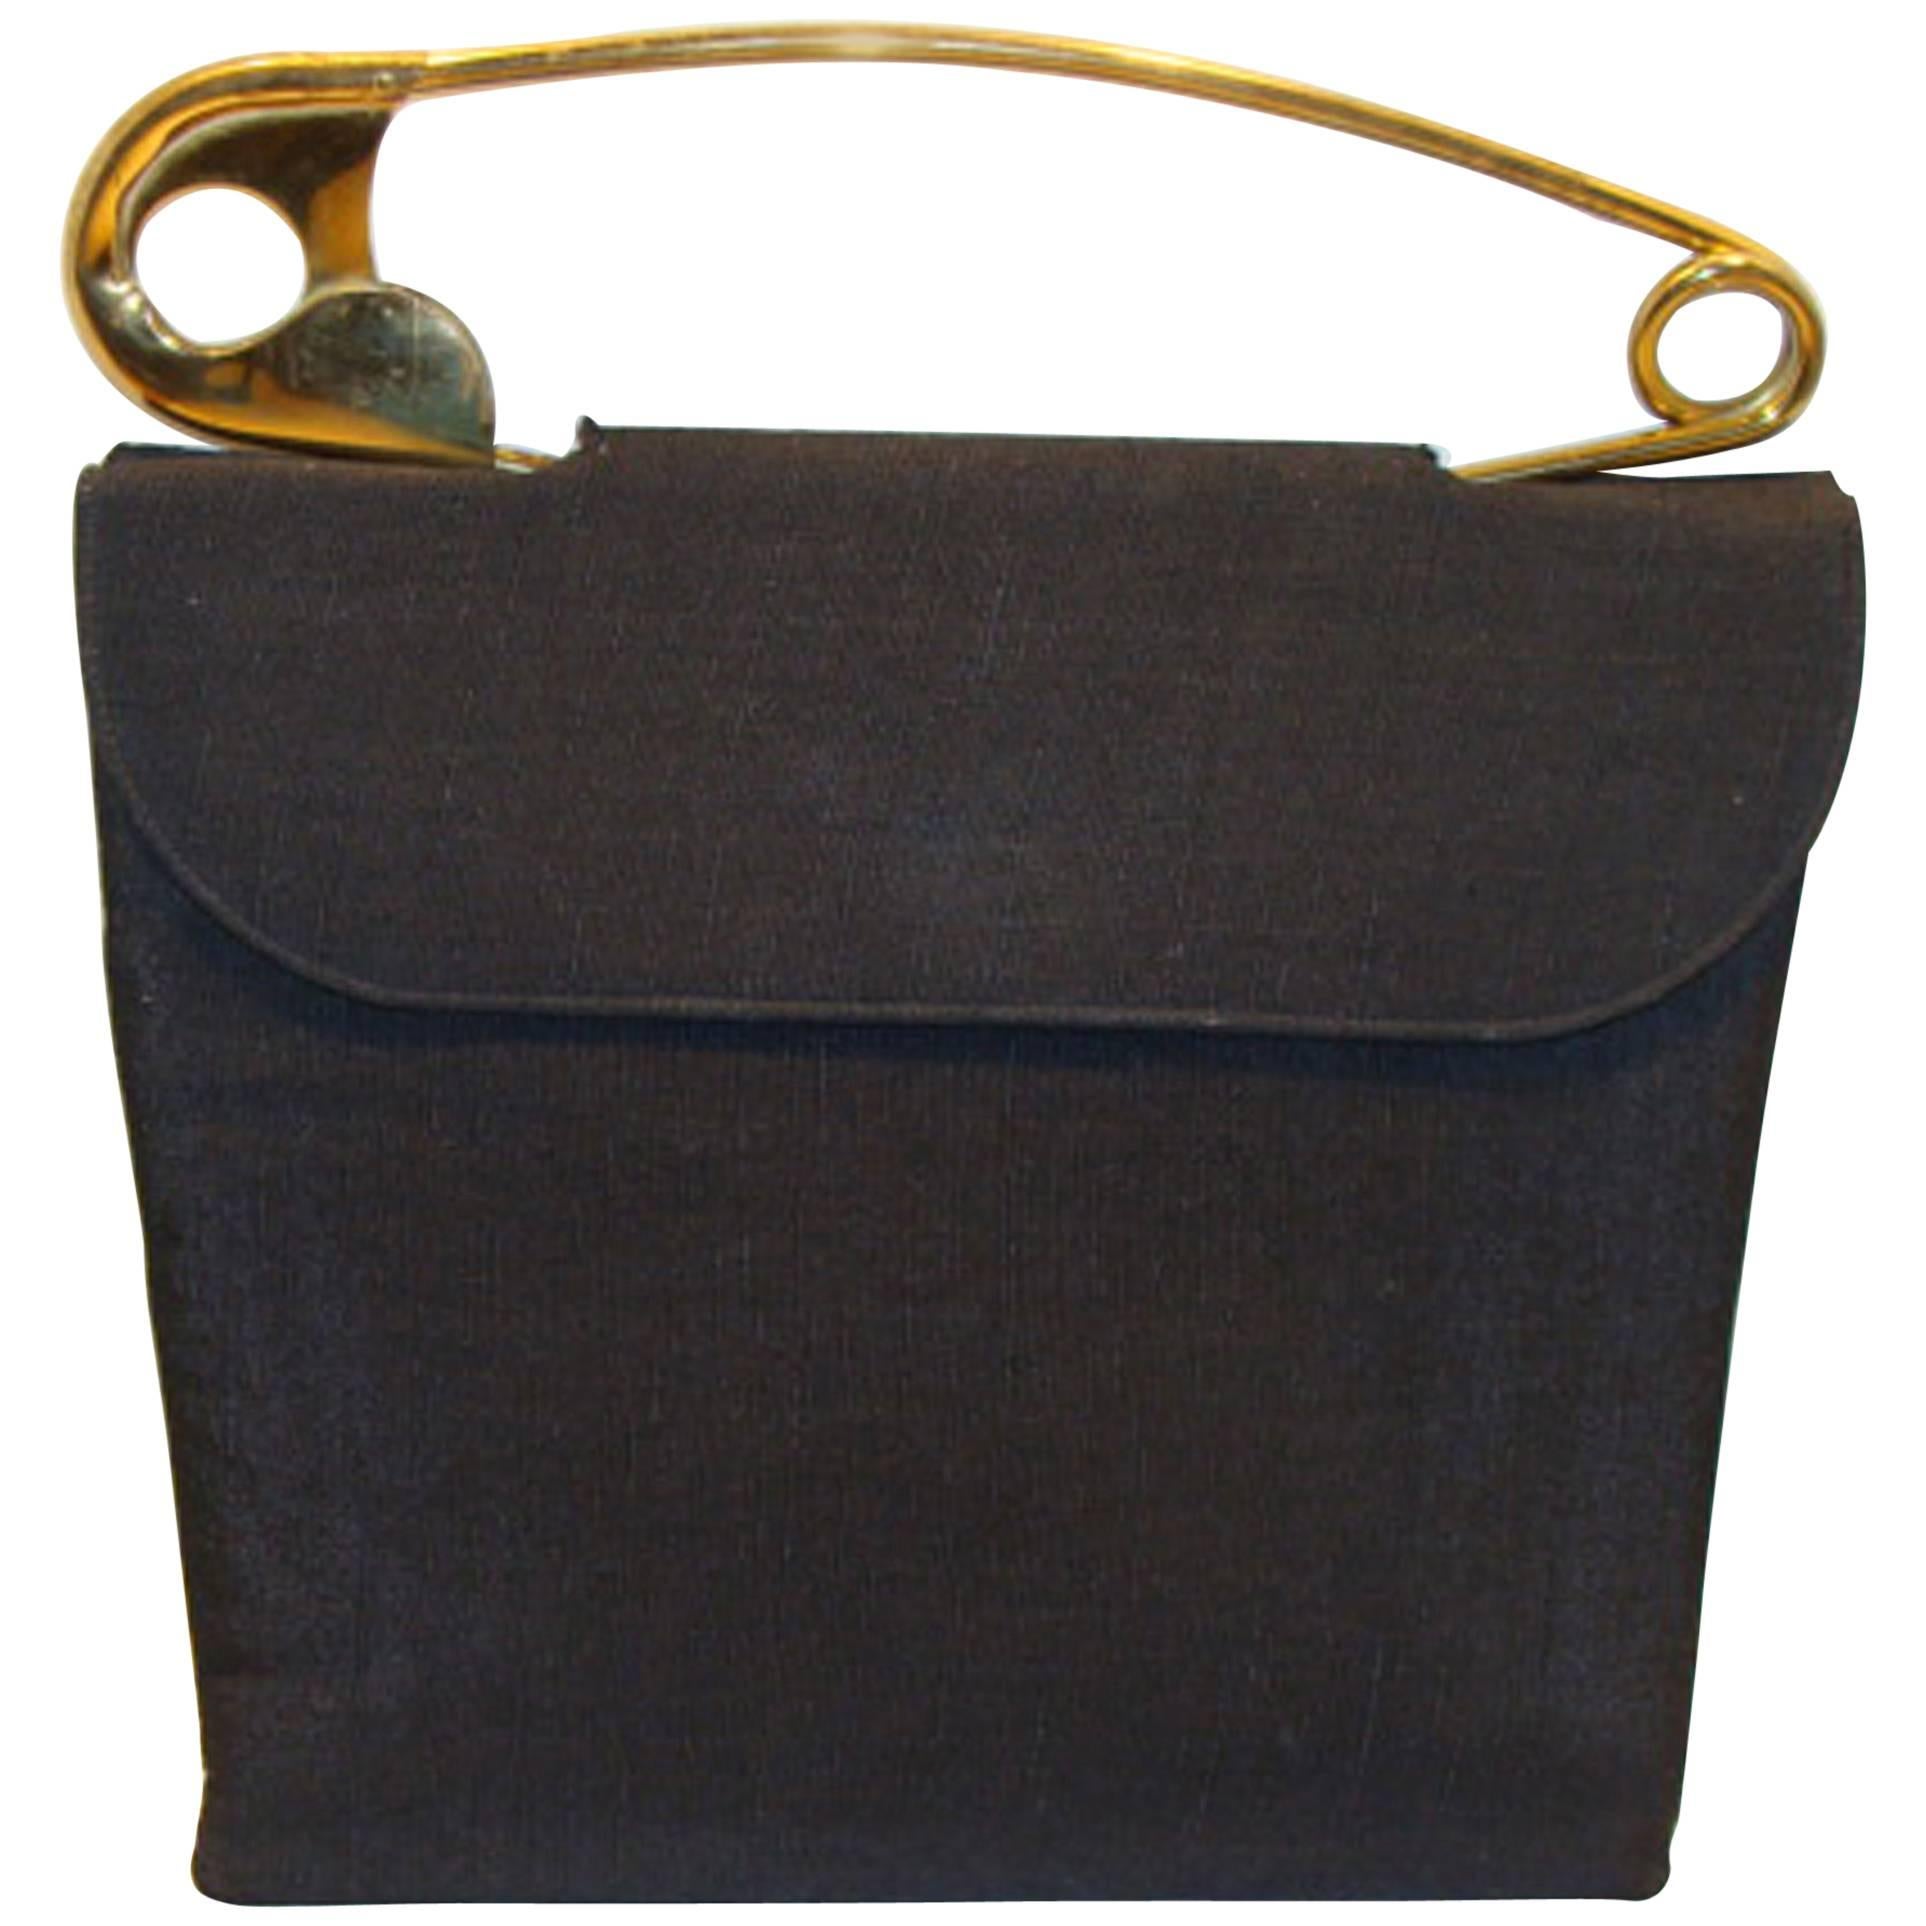 Rare & Iconic Safety Pin Bag in Black Linen Style Weave